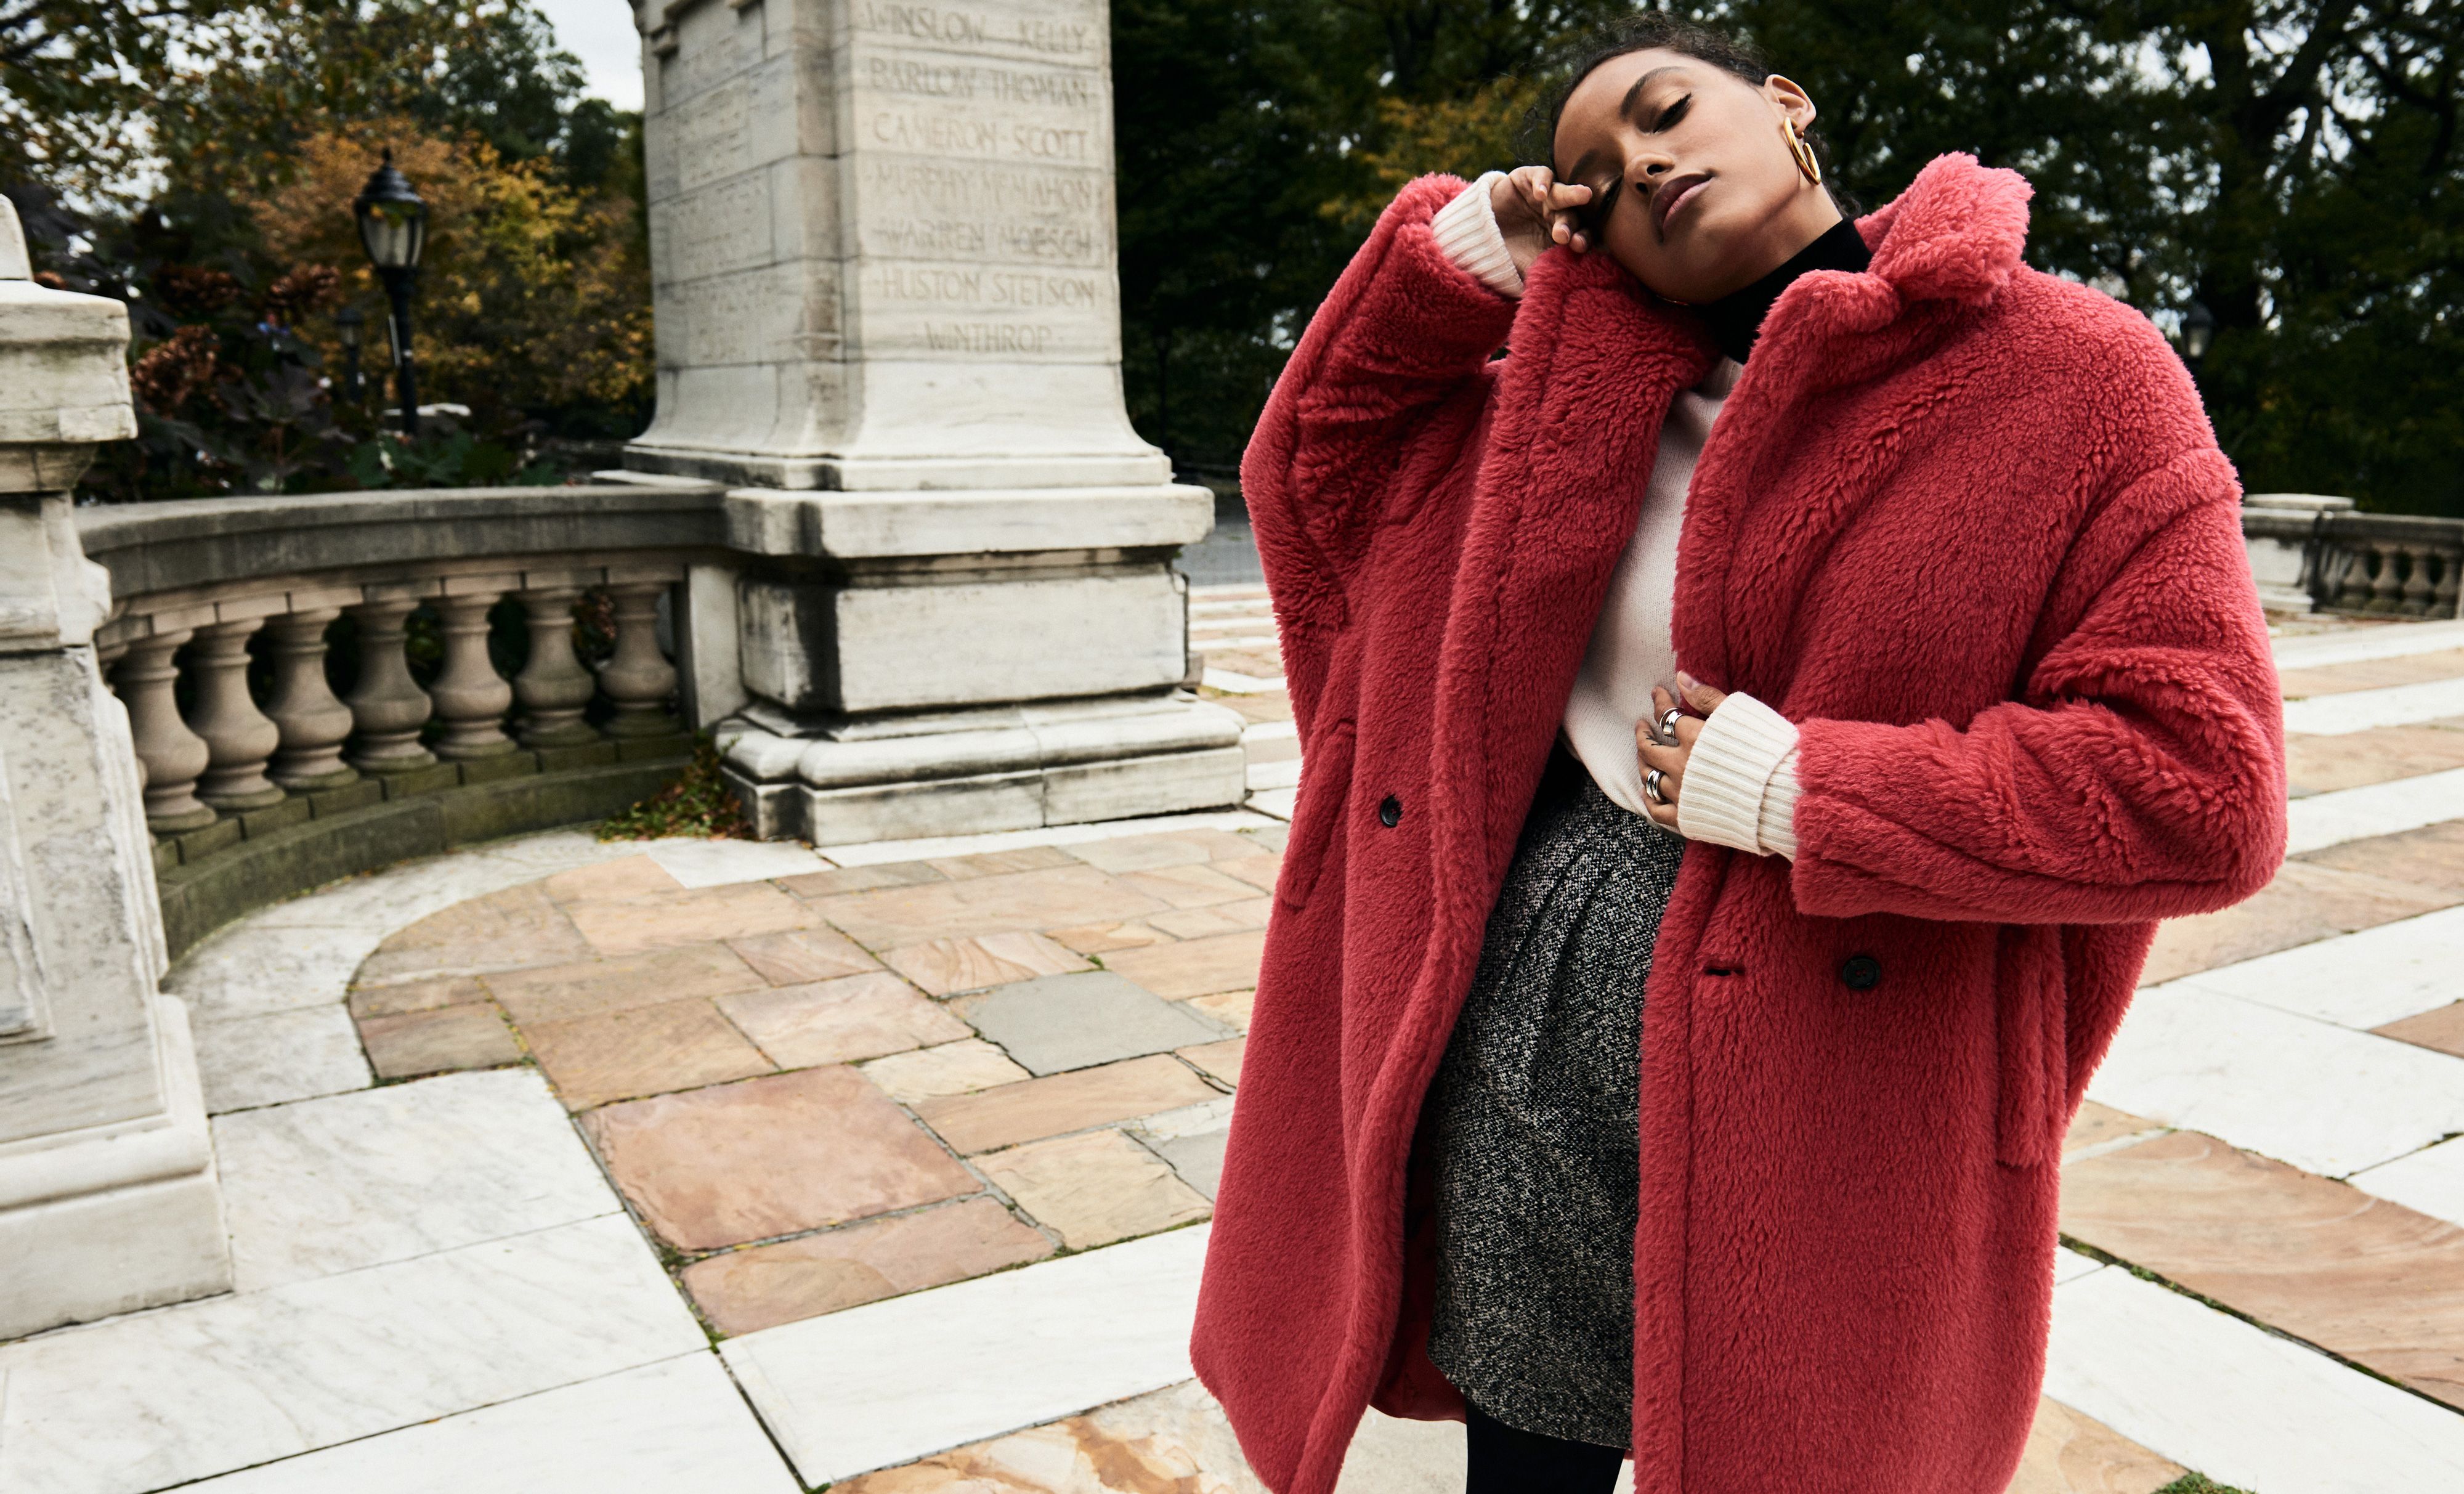 How to Style a Colorful Winter Coat - Max Mara Teddy Coat